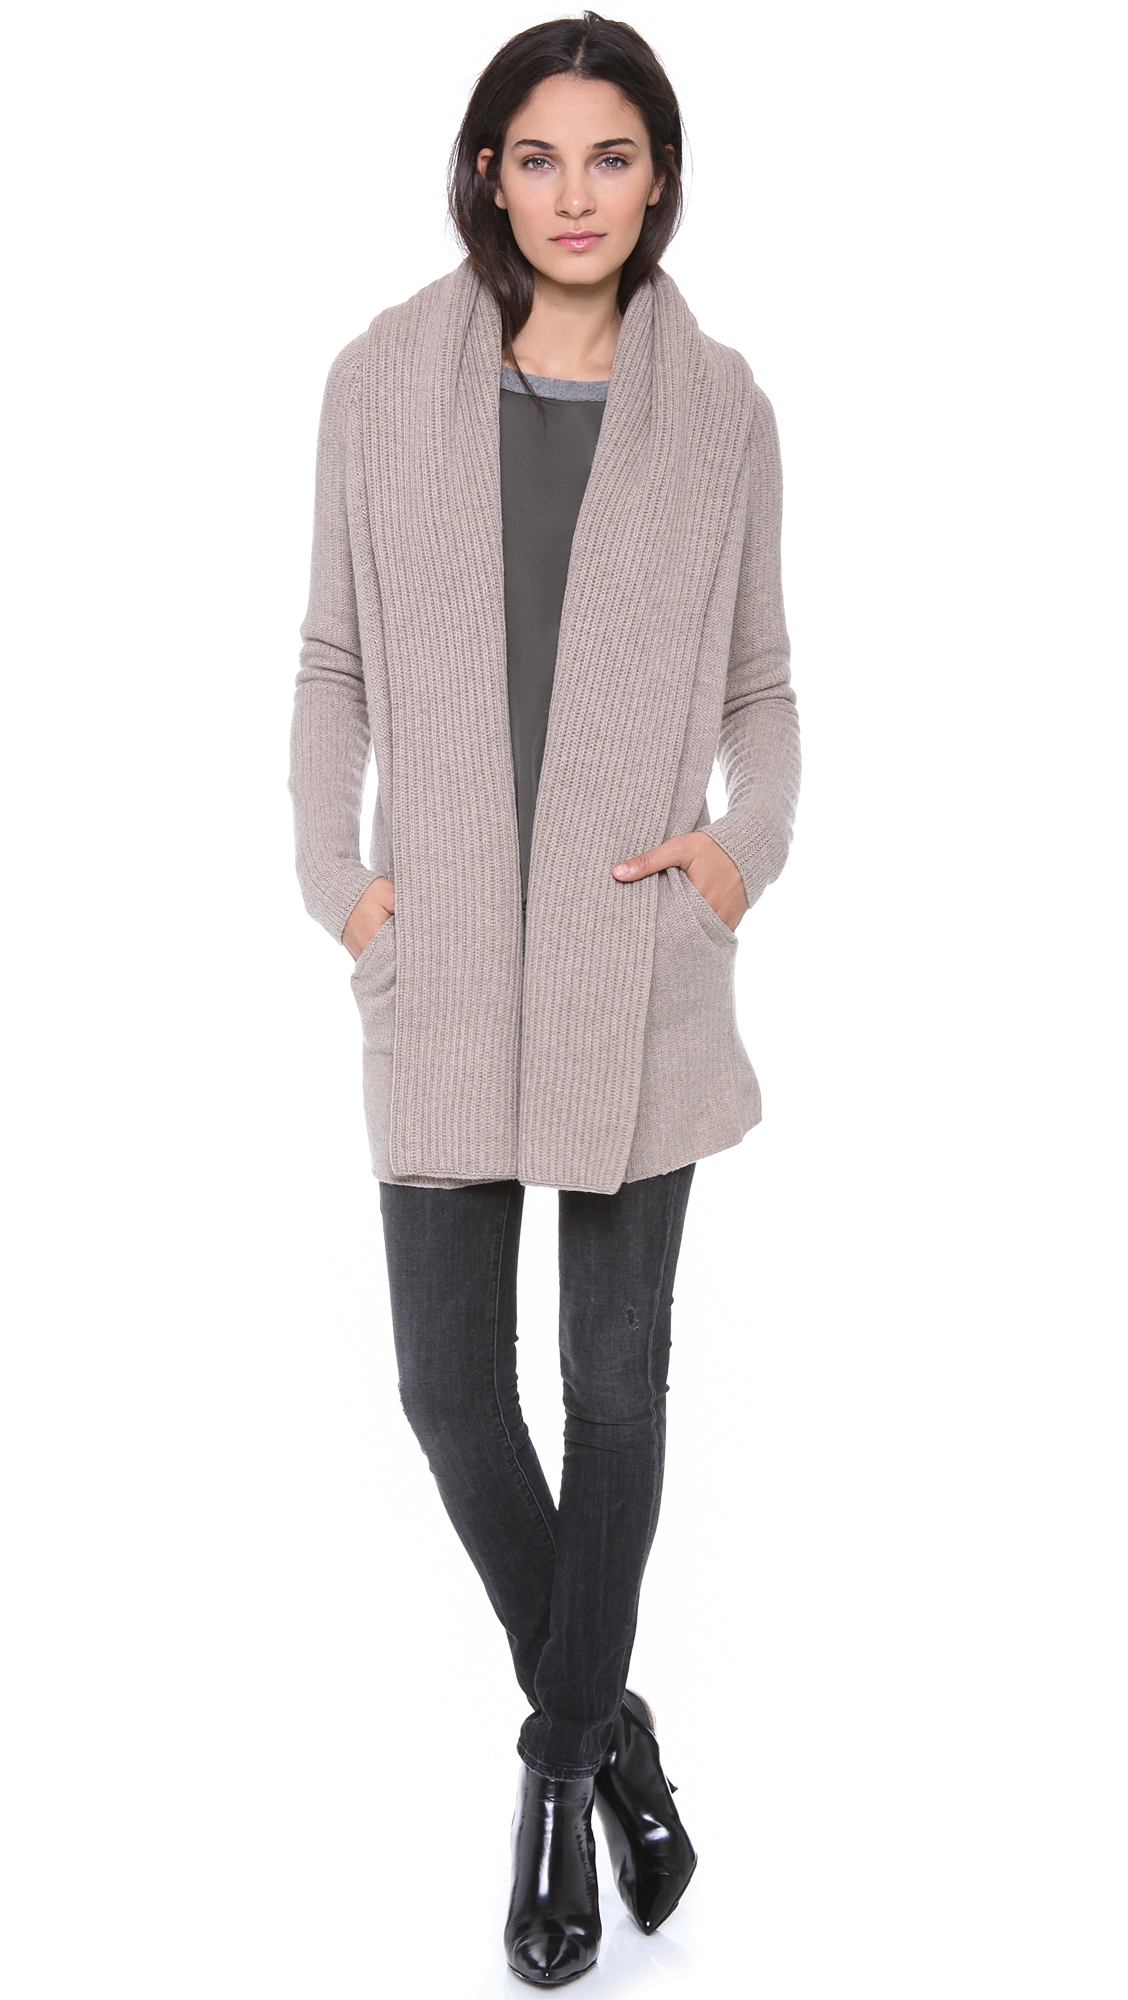 Lyst - Vince Ribbed Shawl Cardigan in Gray